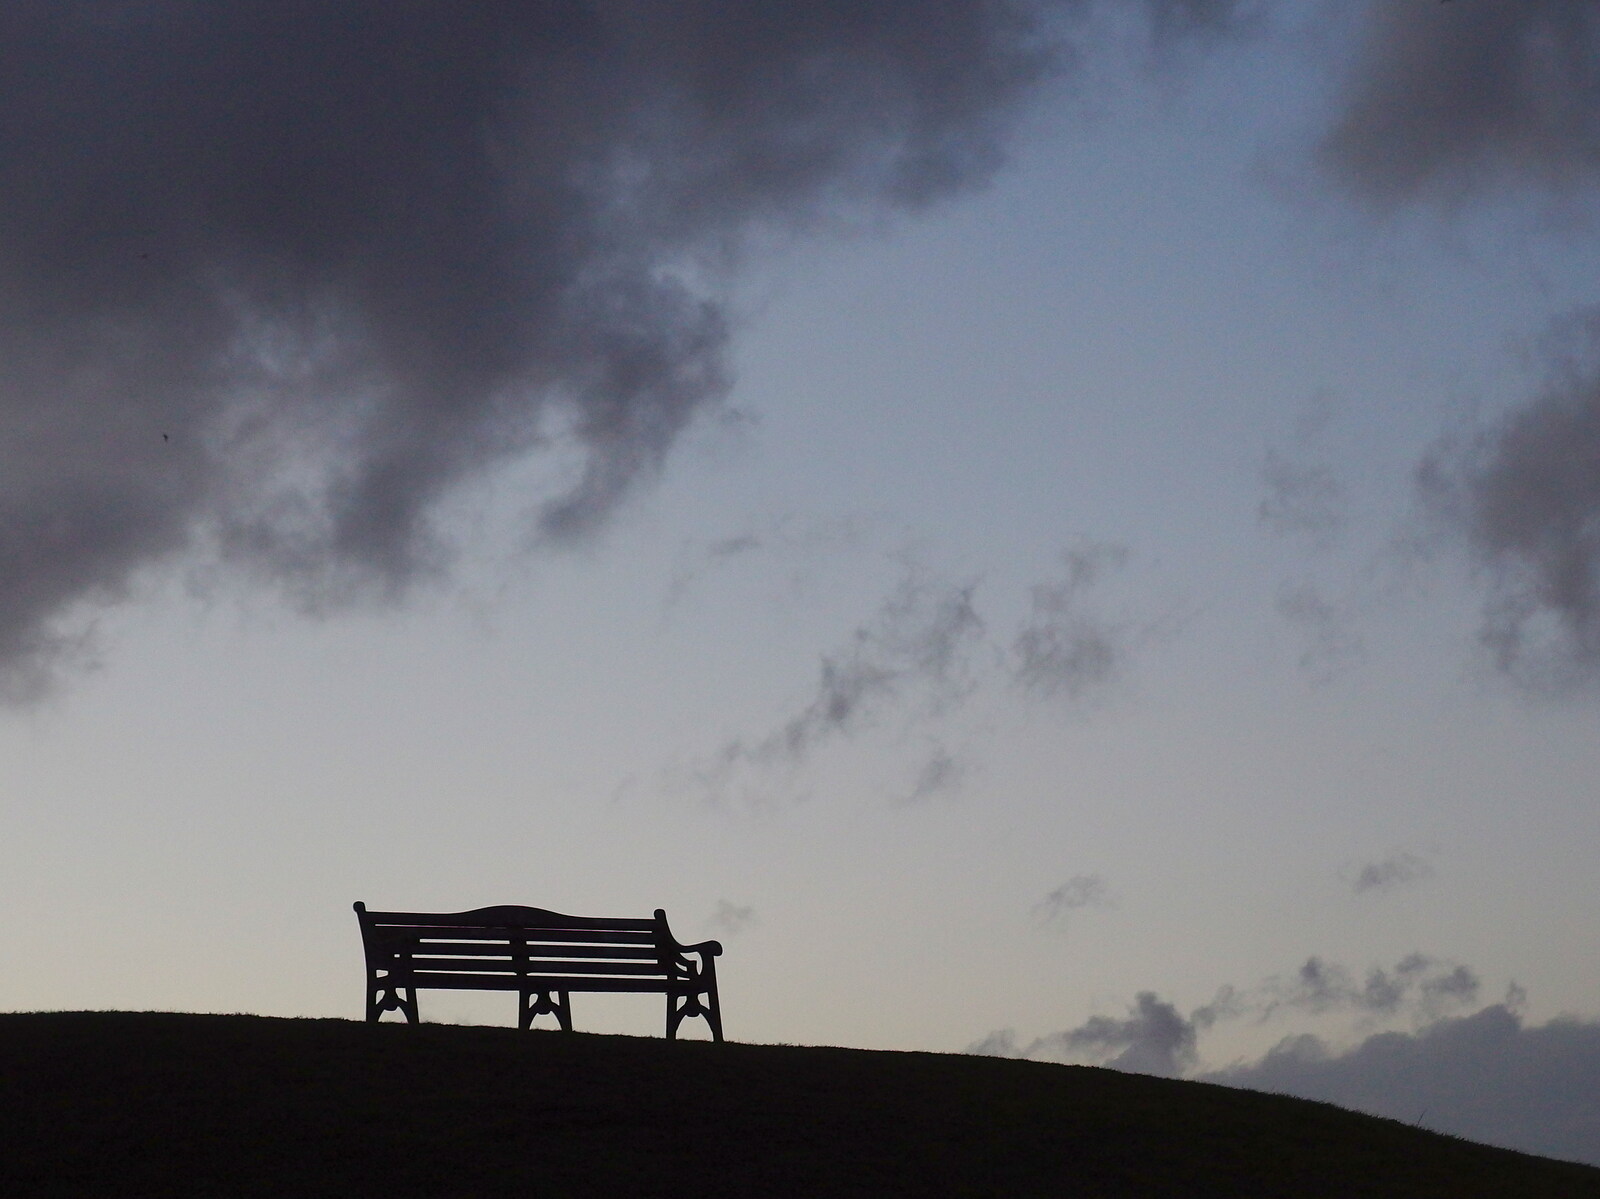 A lonely bench, silhouetted from Dun Laoghaire and an Electrical Disaster, Monkstown, County Dublin, Ireland - 4th January 2014